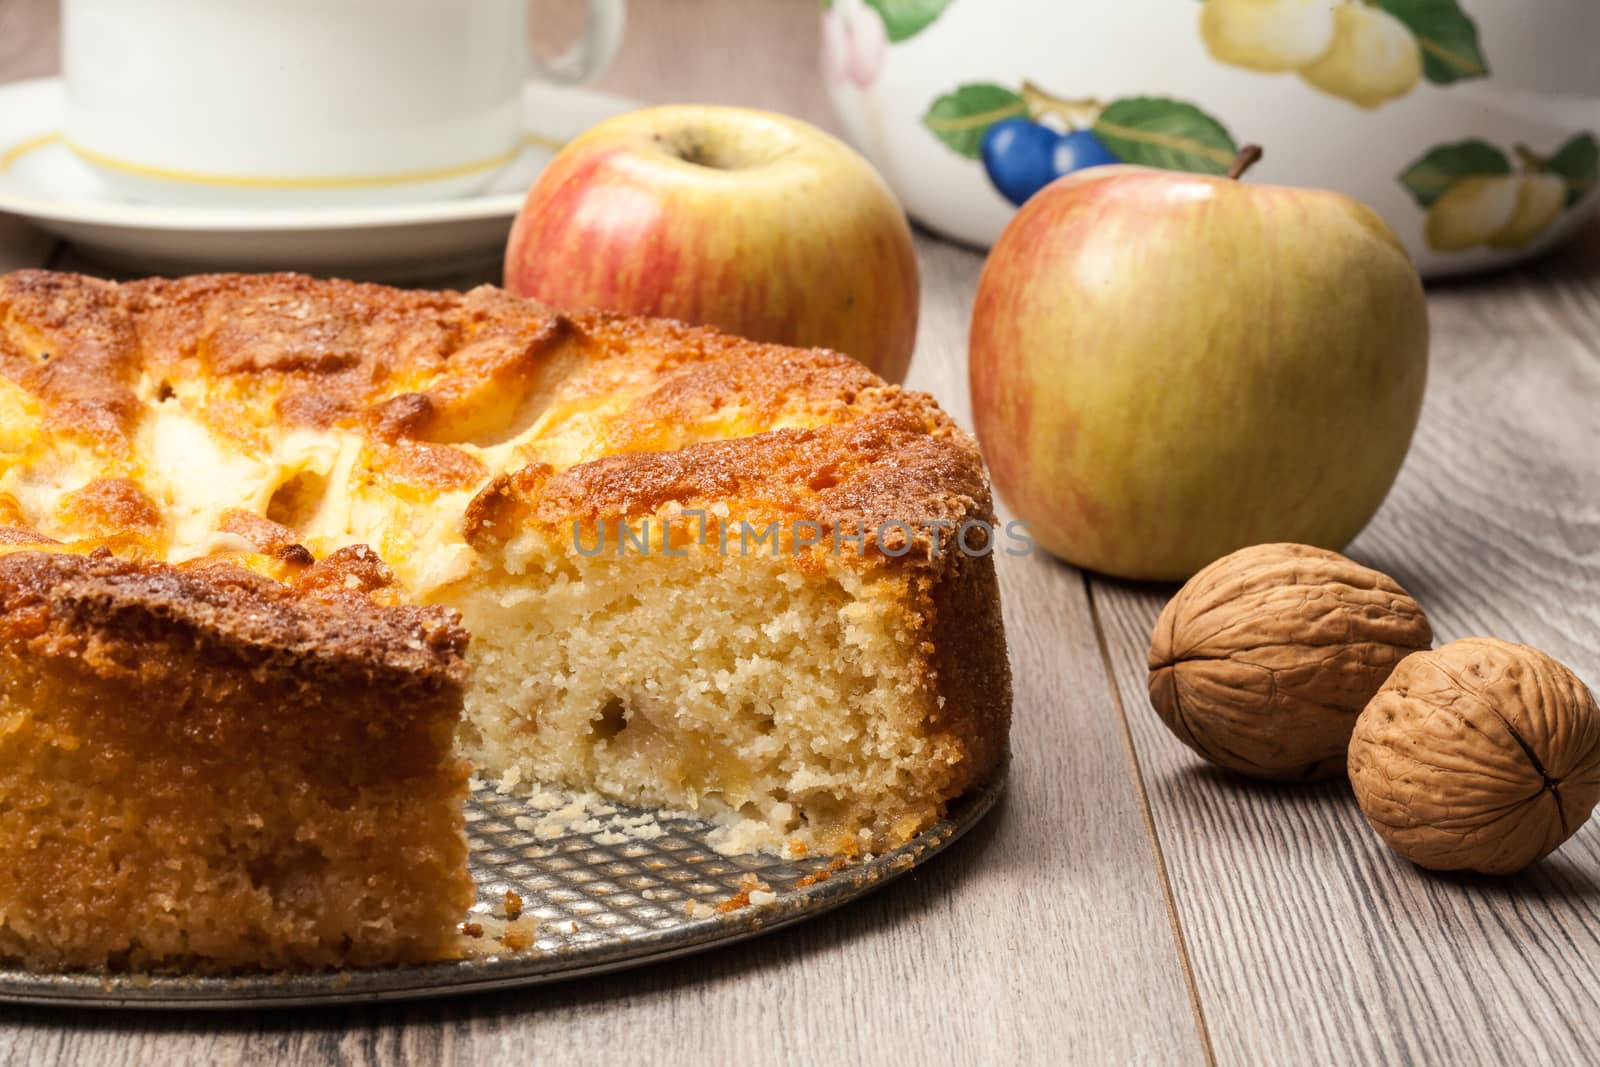 Apple cake by mmproduct